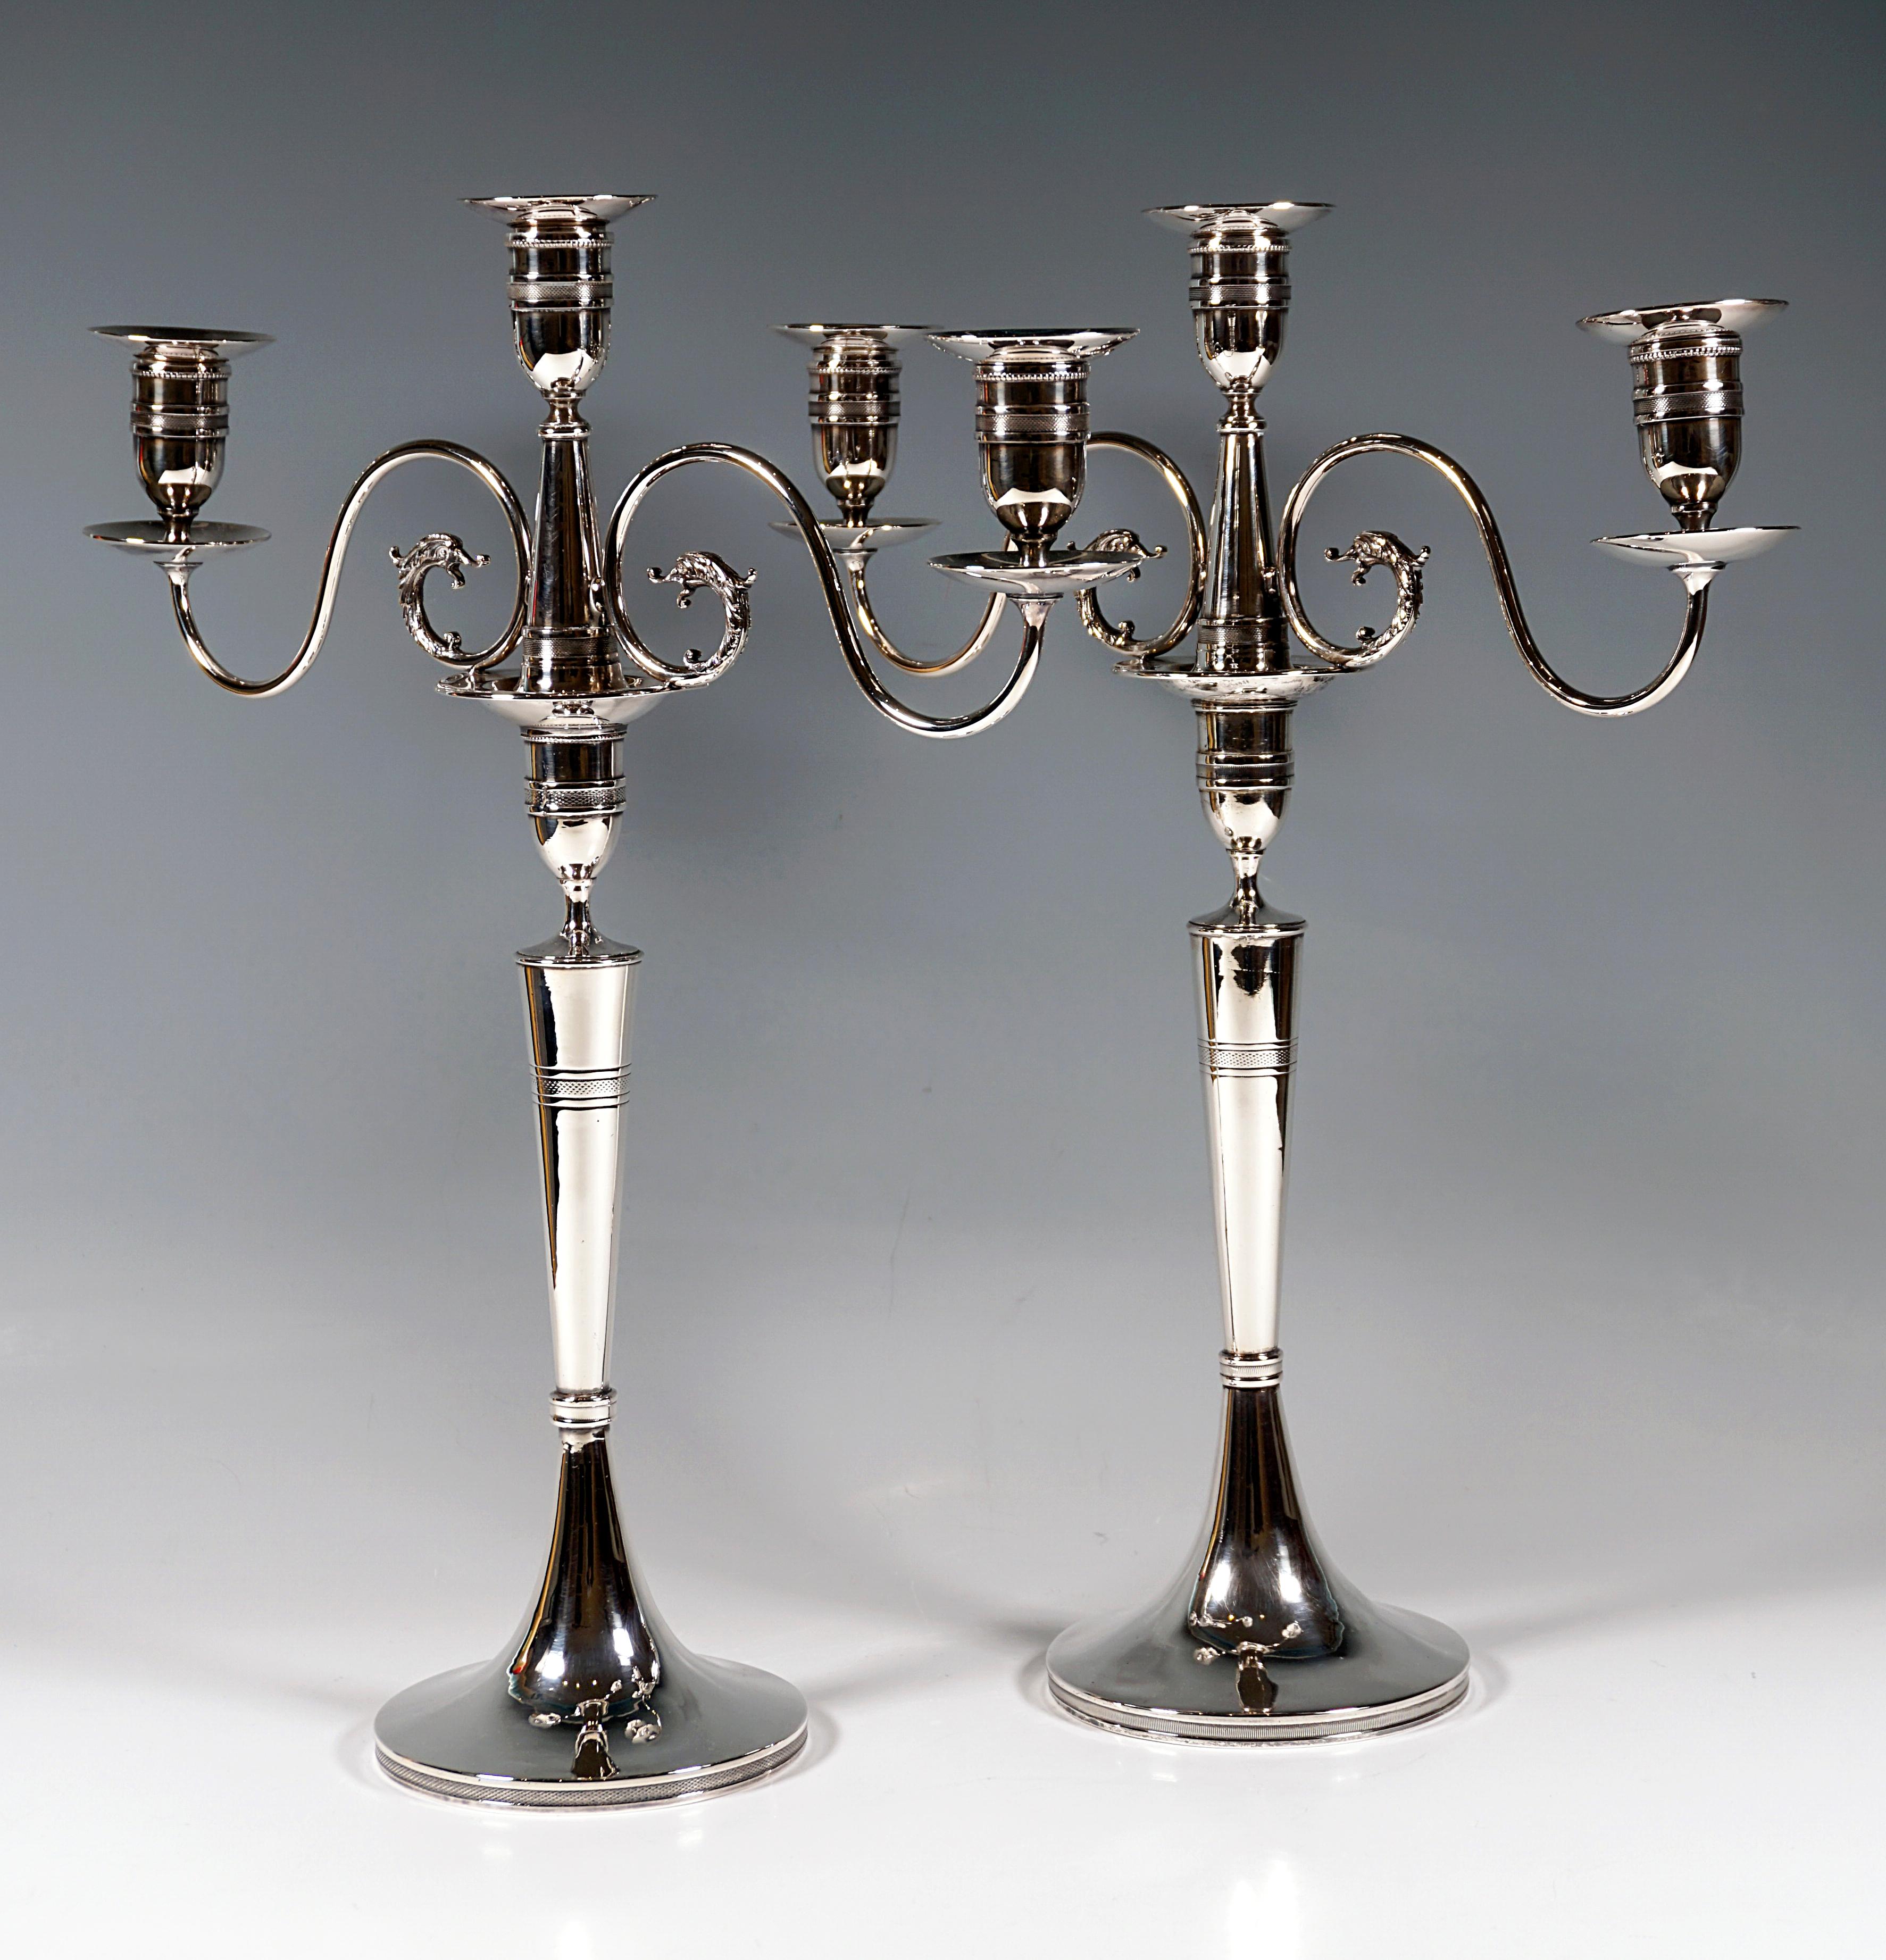 Austrian Pair Of Antique 3-Flame Empire Silver Candle Holders, by Anton Köll, Vienna 1807